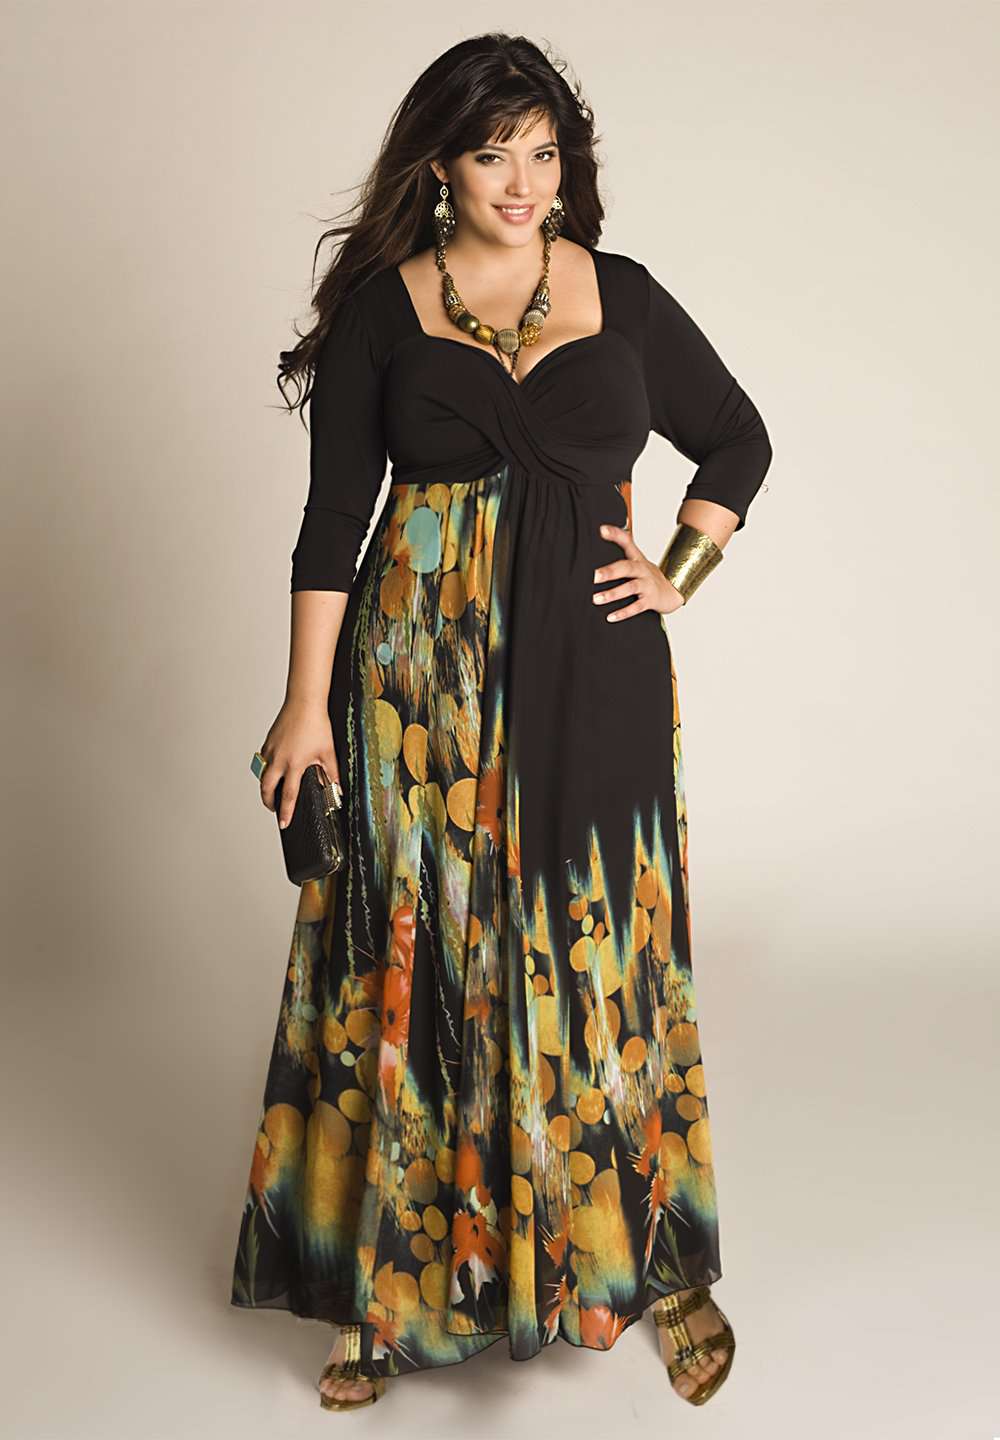 Plus size black made to measure dress